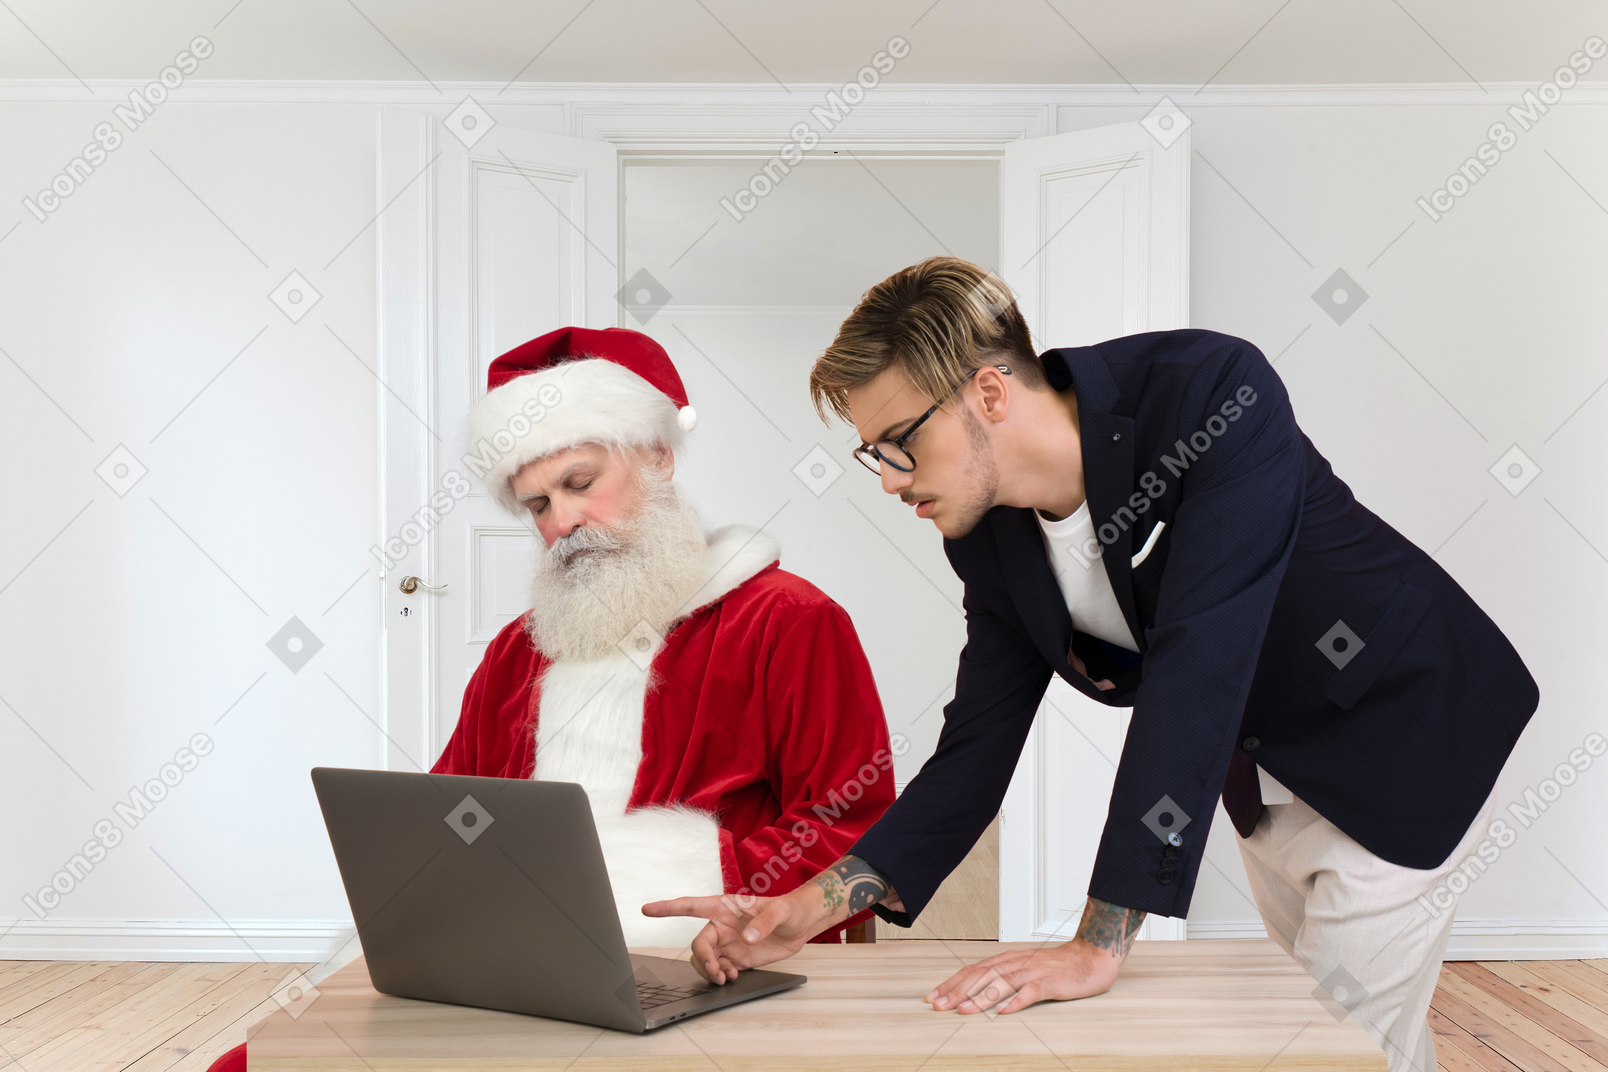 Santa is sleeping while man is working with laptop